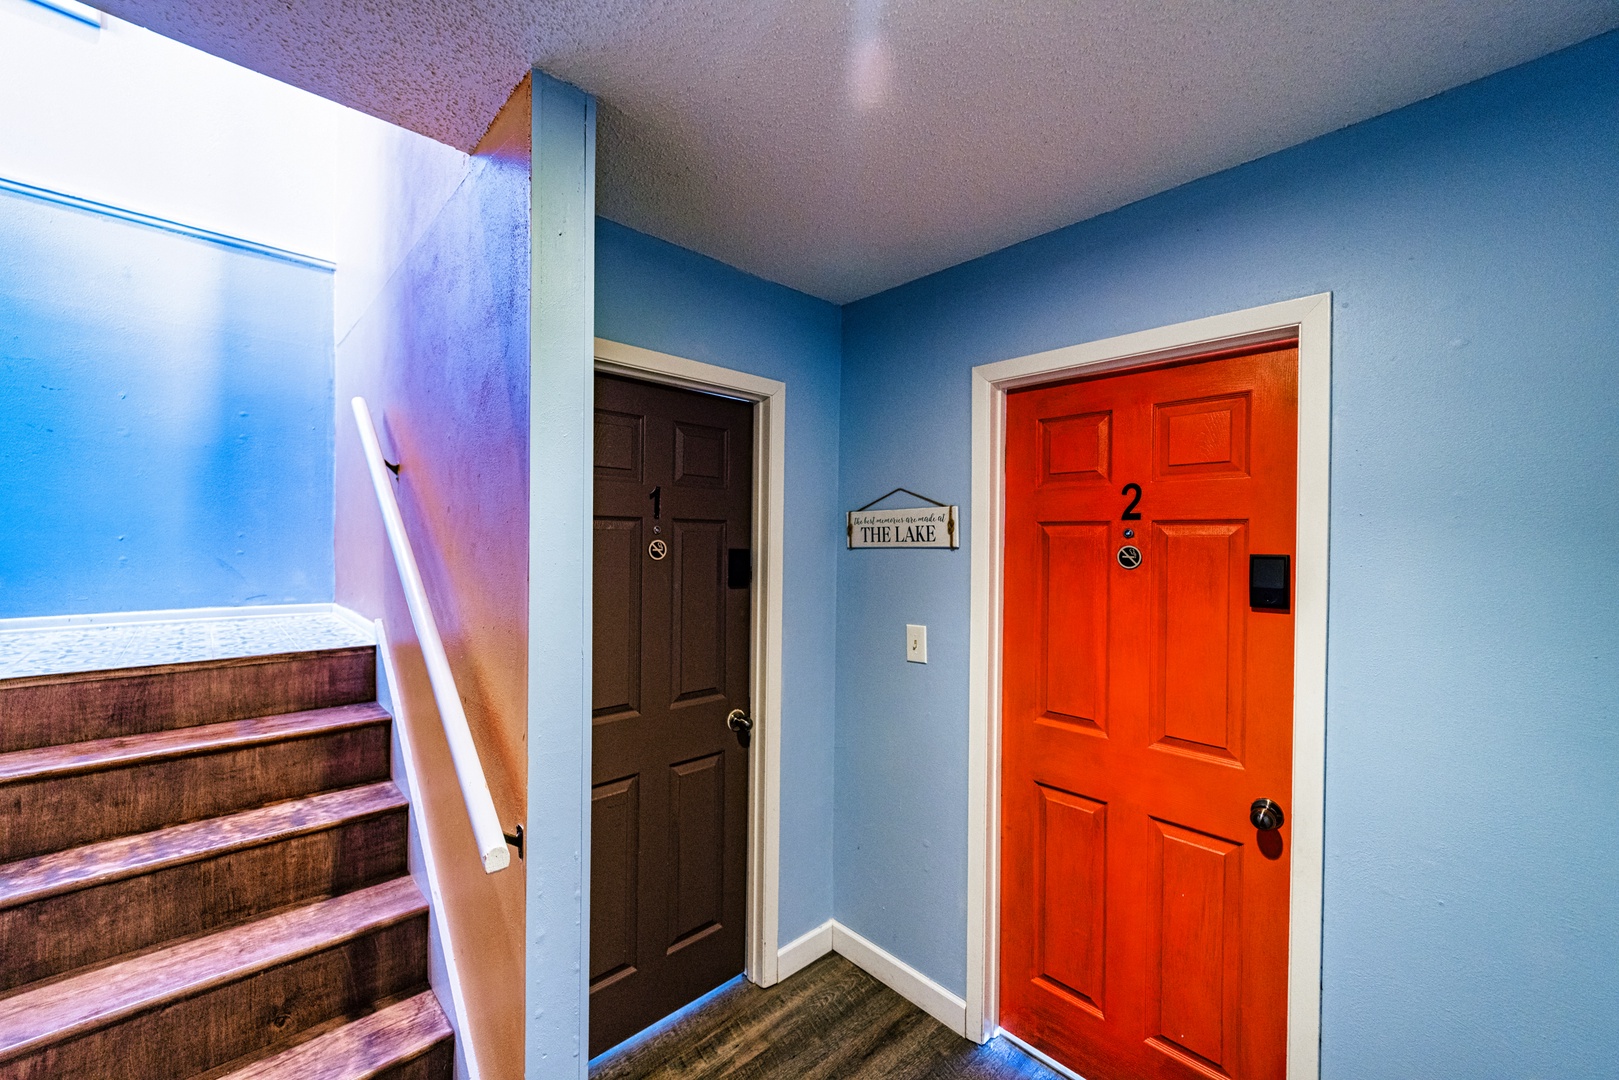 Both studios offer a private entrance and keyless lock for guest convenience